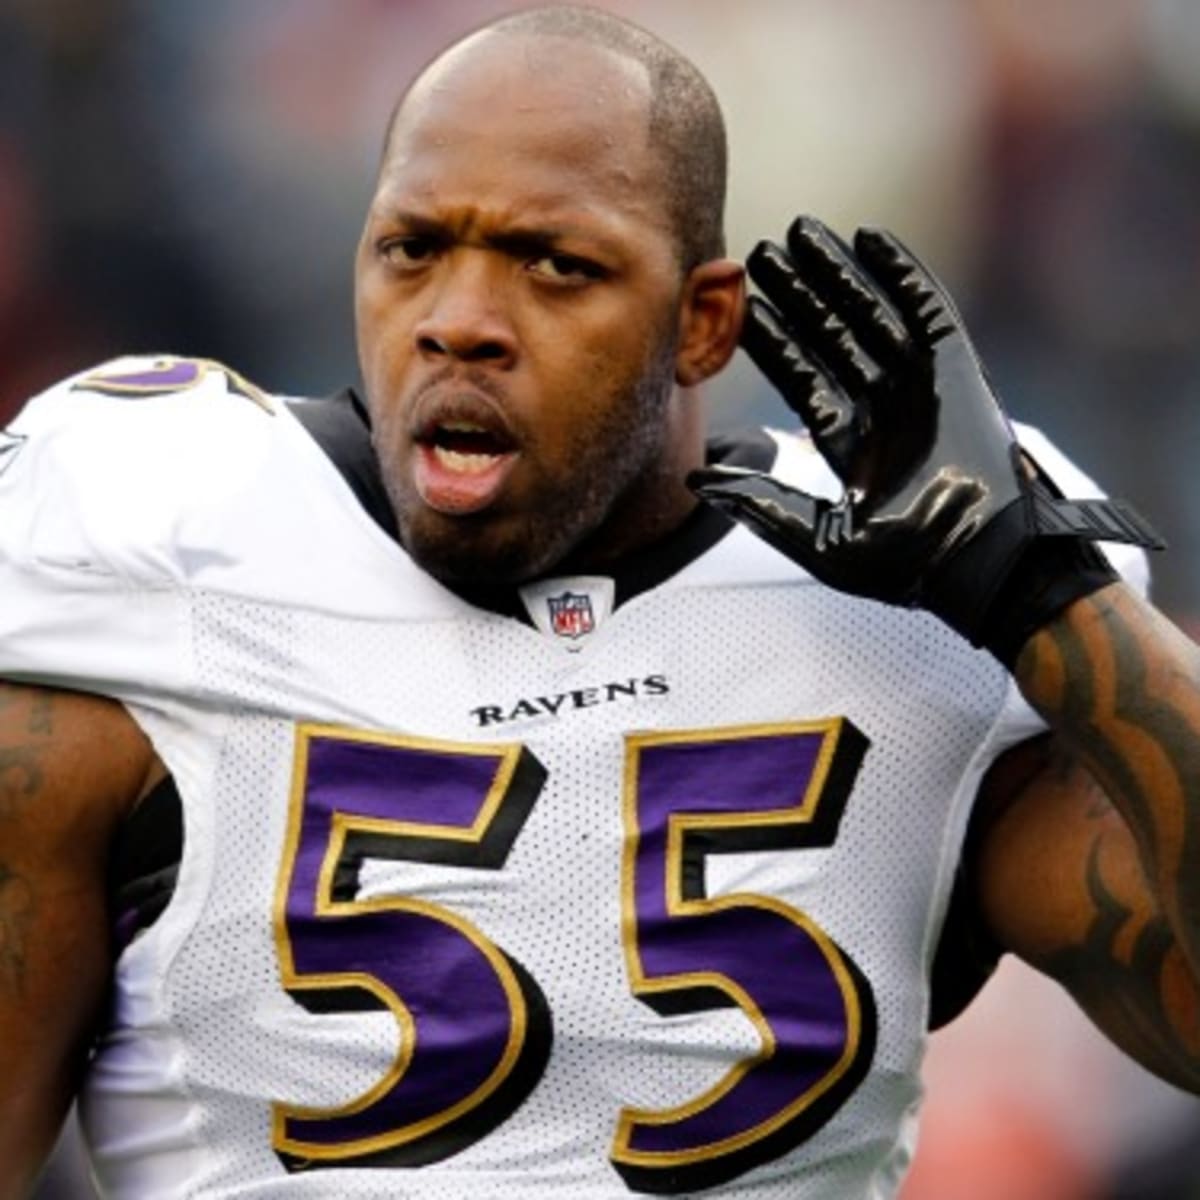 Here's What Terrell Suggs Is Saying at the Super Bowl